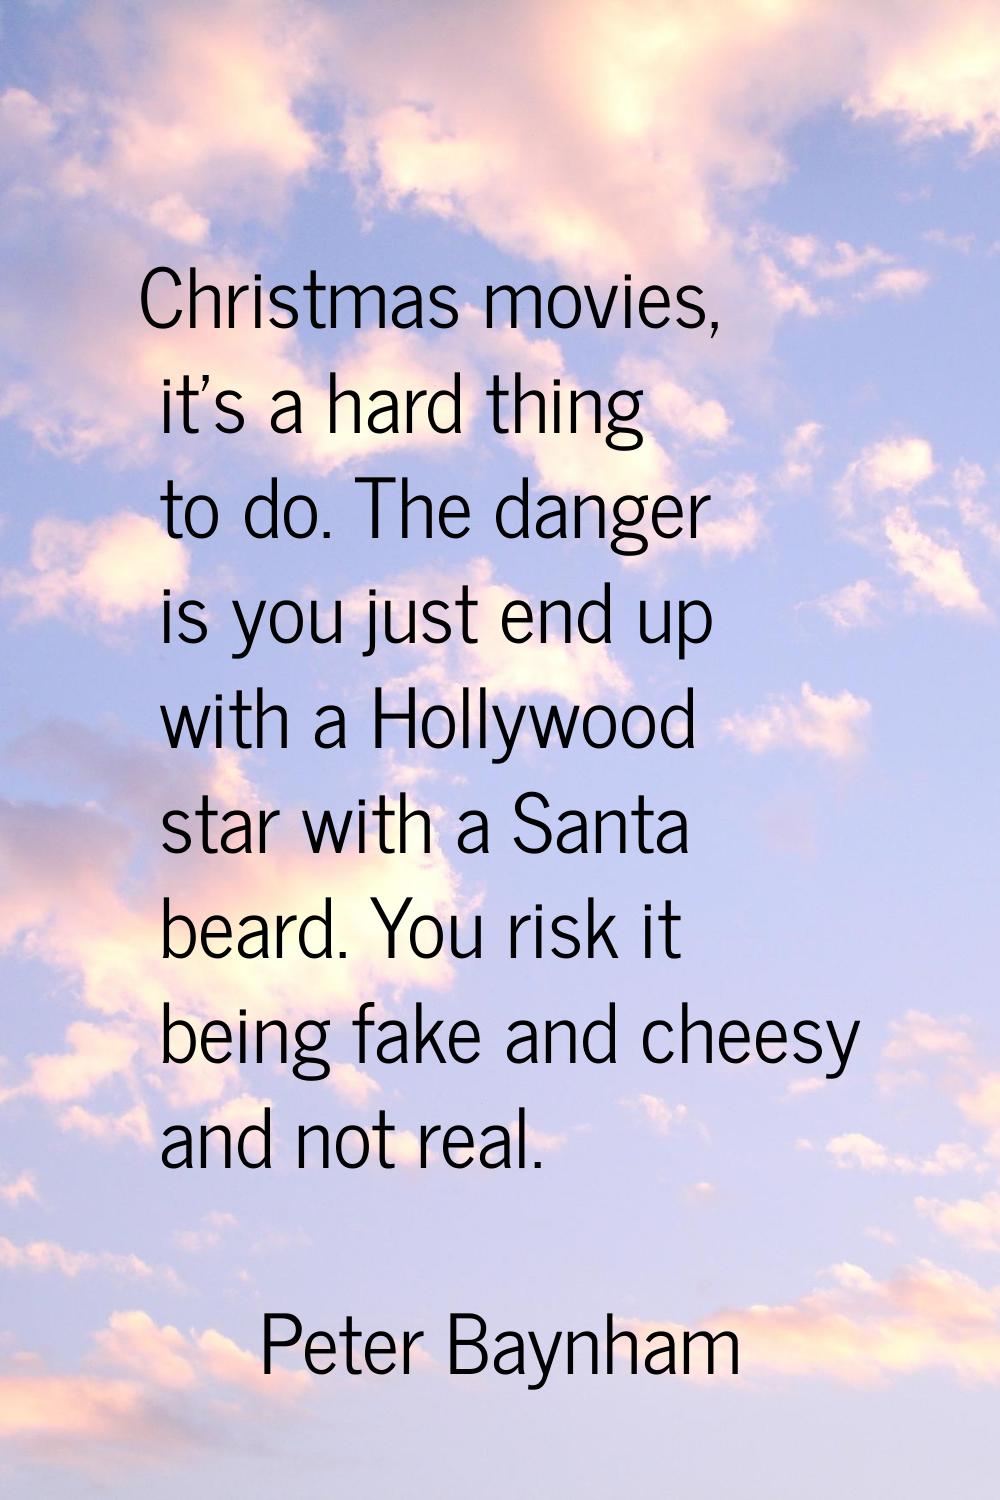 Christmas movies, it's a hard thing to do. The danger is you just end up with a Hollywood star with